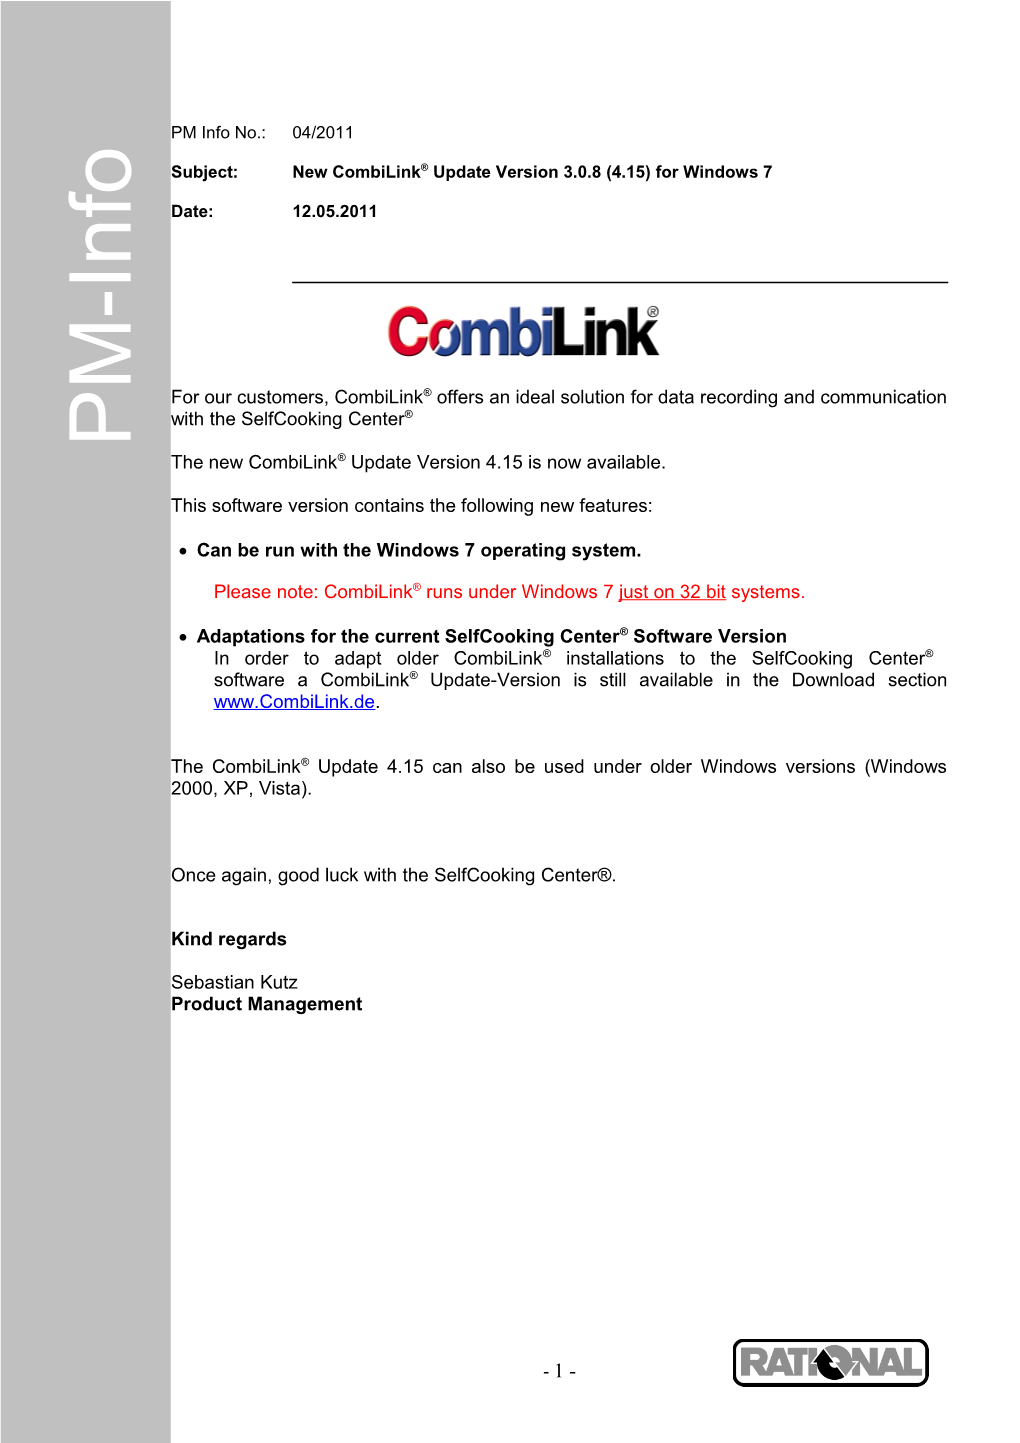 Subject: New Combilink Update Version 3.0.8 (4.15) for Windows 7